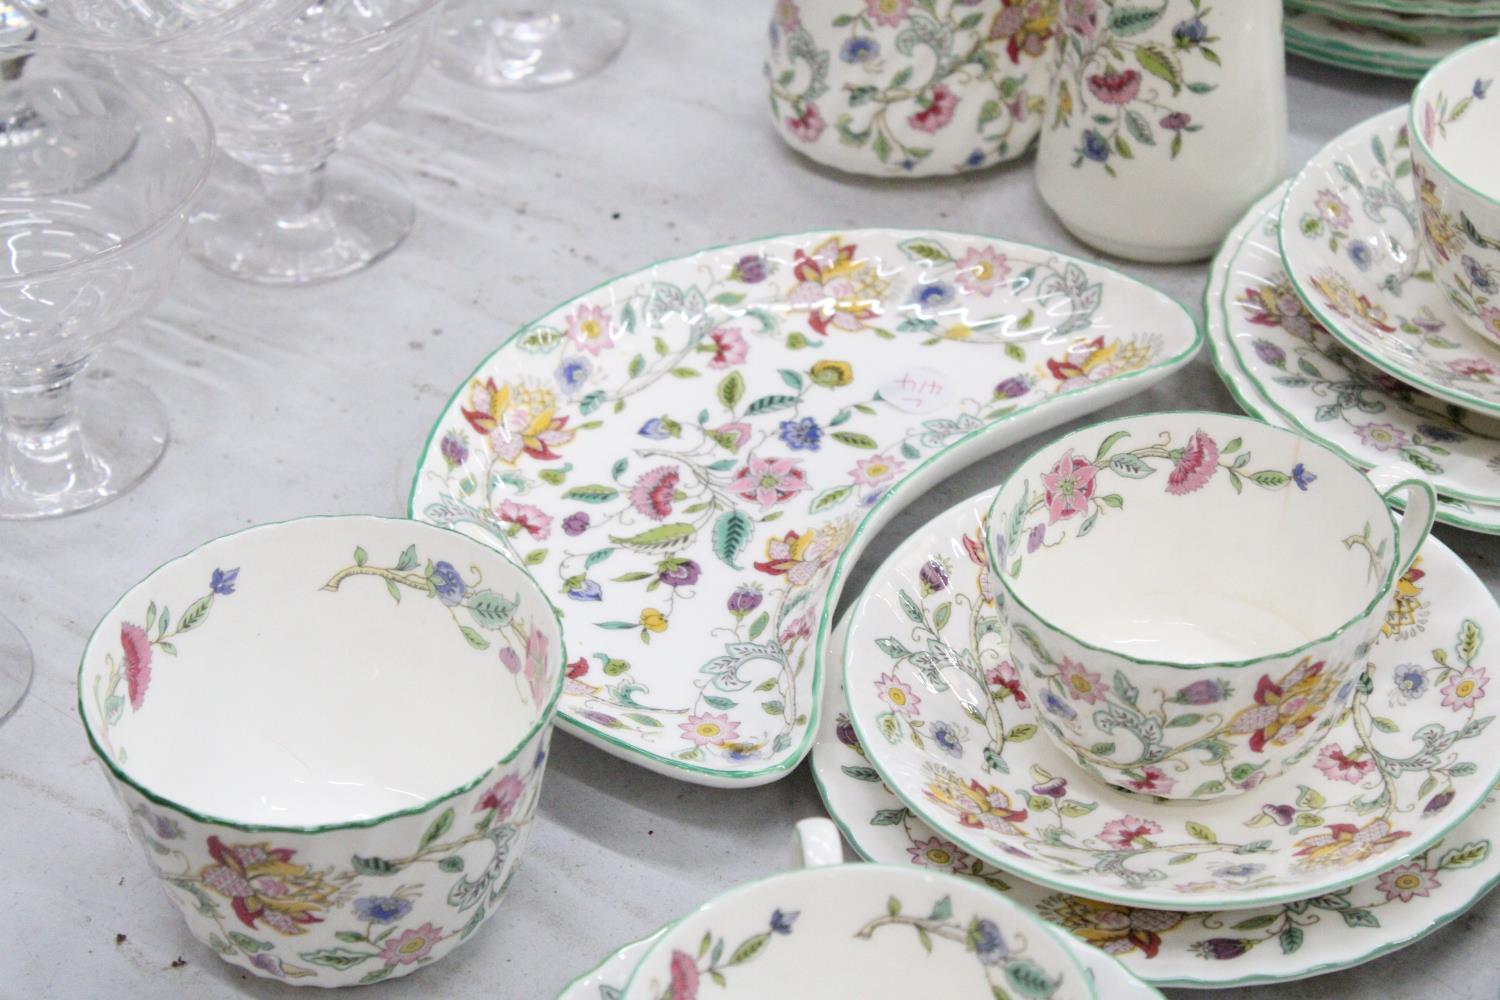 A LARGE MINTON "HADDON HALL" TEA SET TO INCLUDE CUPS, SAUCERS, SIDE PLATES, CAKE PLATES, SUGAR - Image 3 of 6